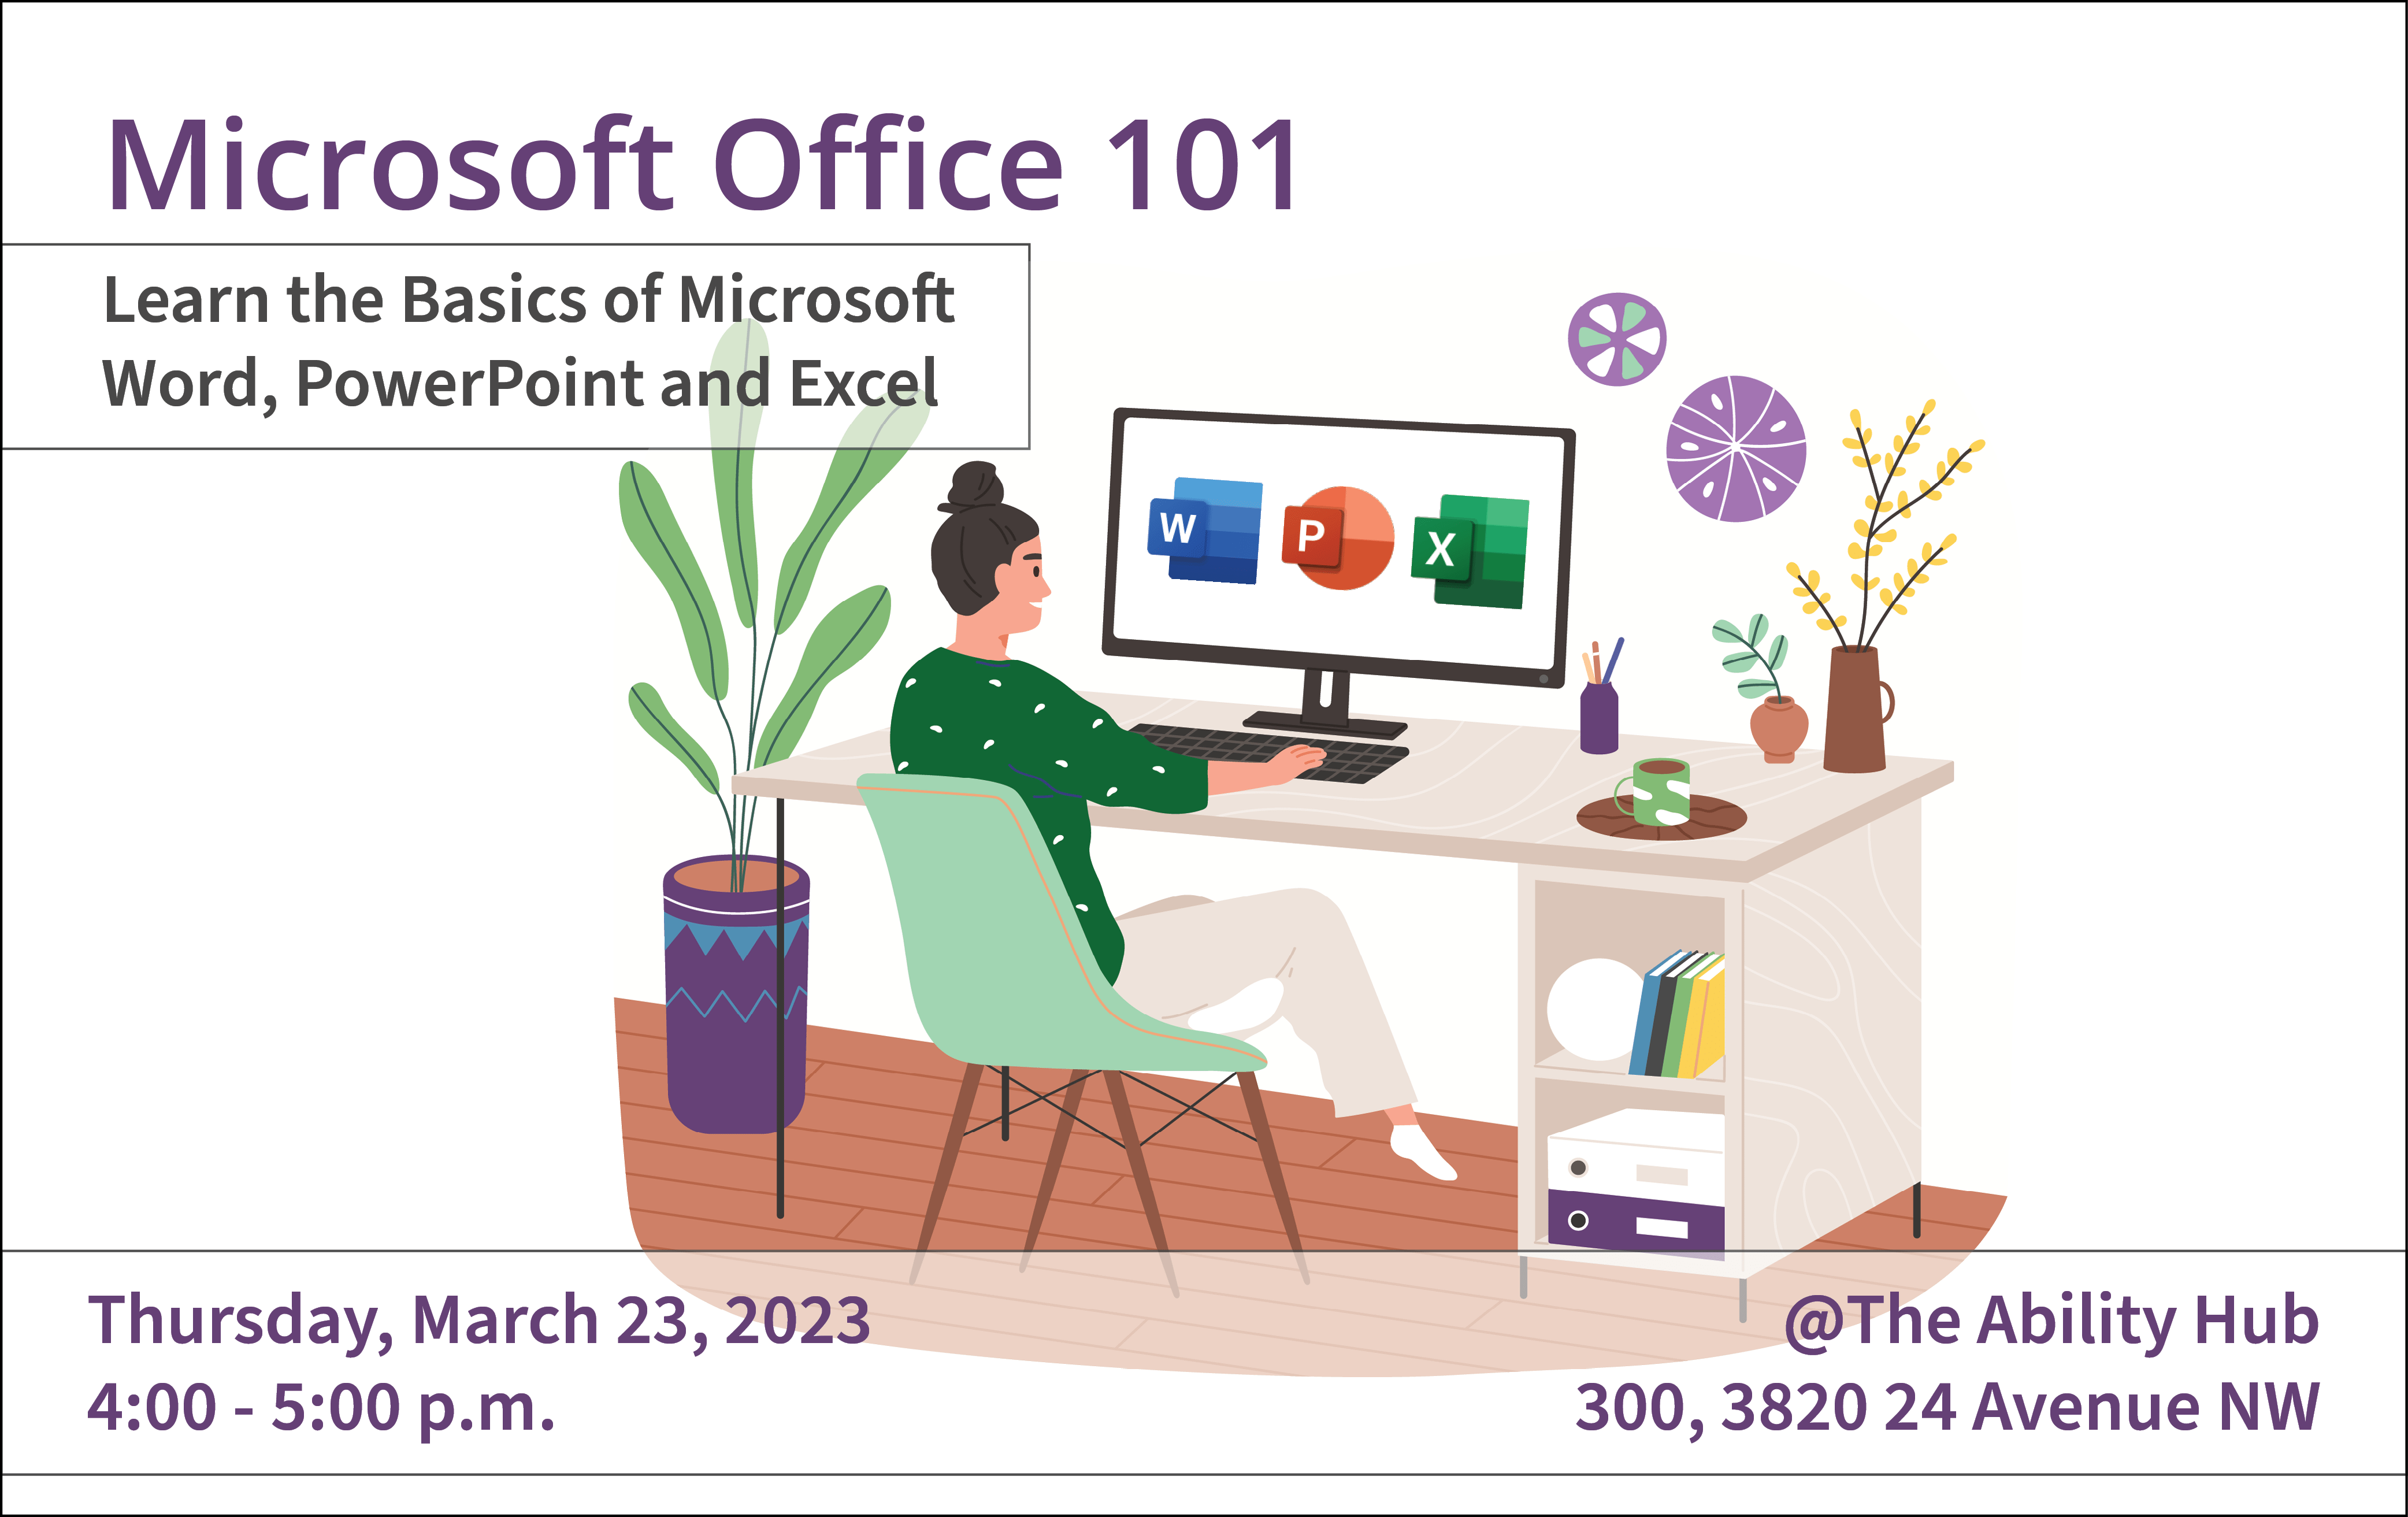 Microsoft Office, Learn the basics, word, powerpoint, excel, exploration session